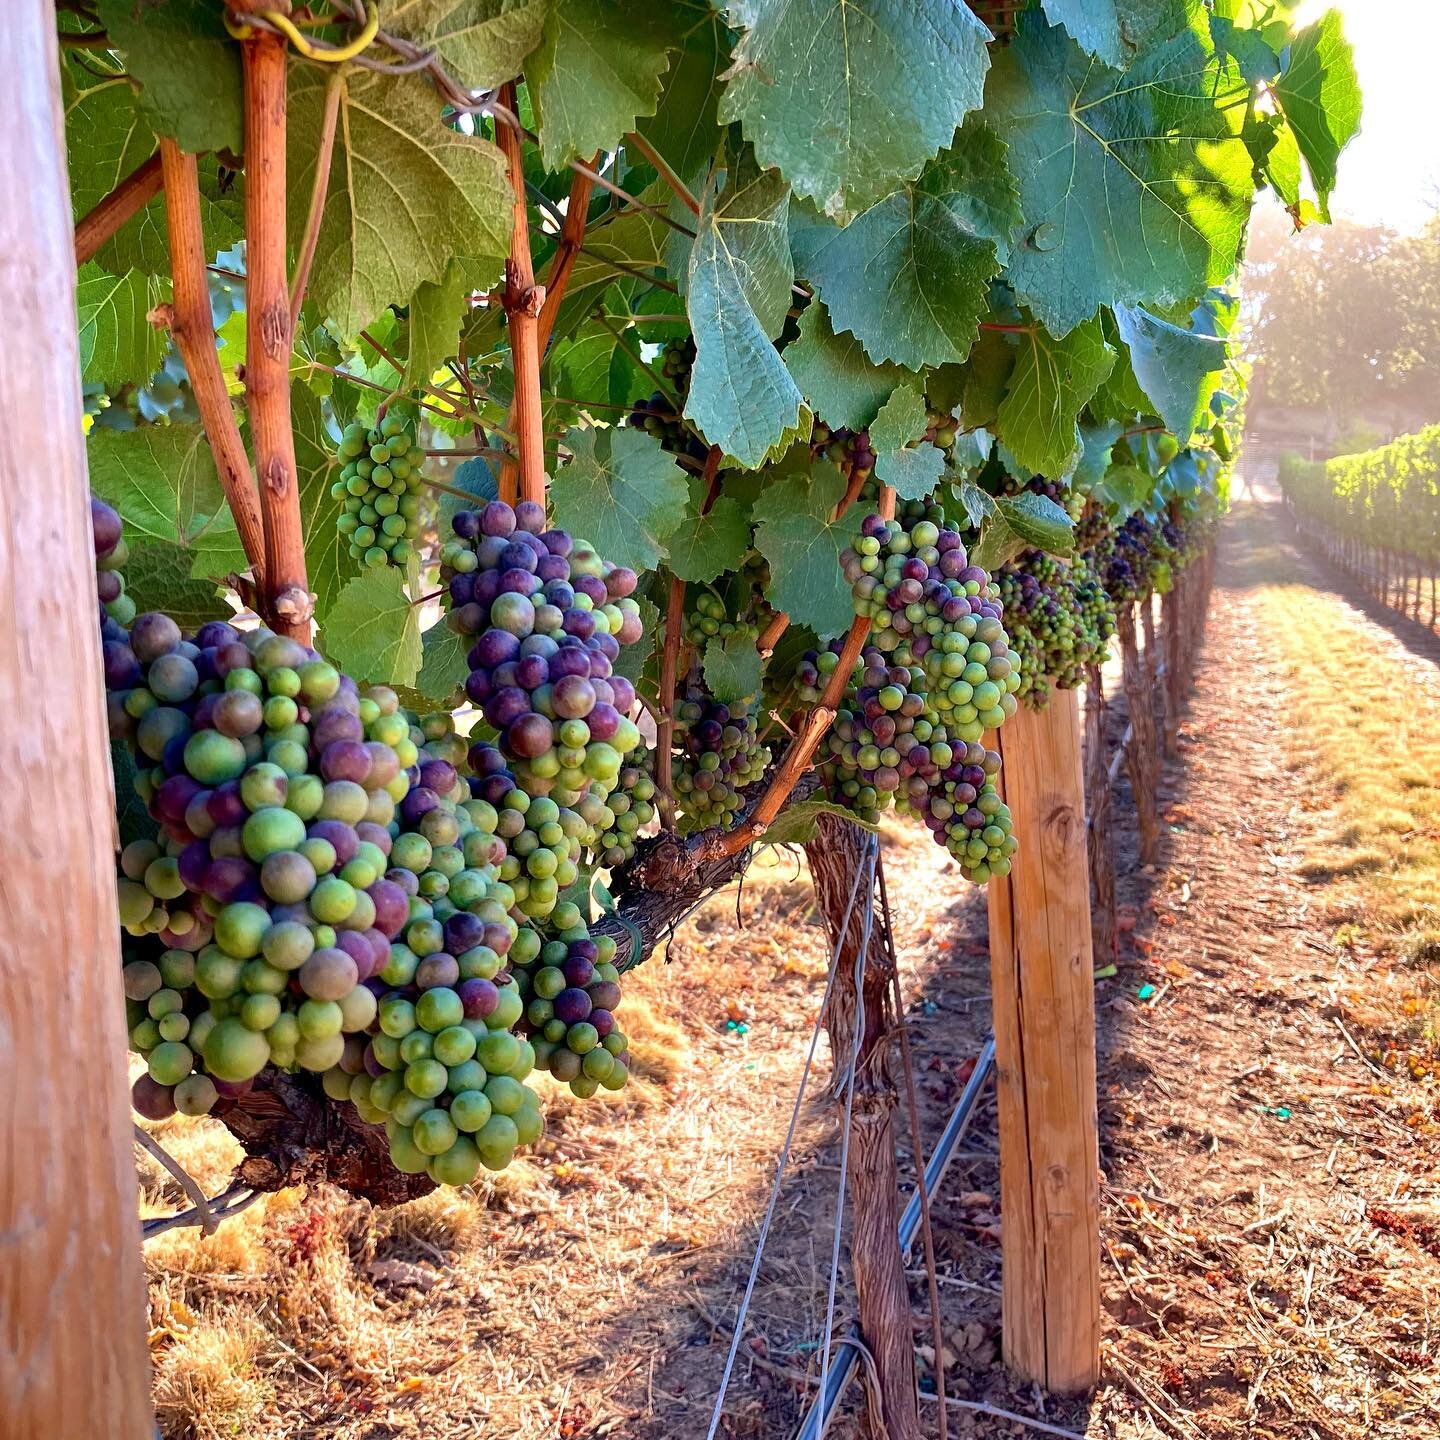 @wineenthusiast has recently nominated Southern Oregon&rsquo;s Rogue Valley for the 2022 wine region of the year. I recently visited for the first time and later conducted a tasting featuring the amazing variety of grapes grown in Oregon, many grown 